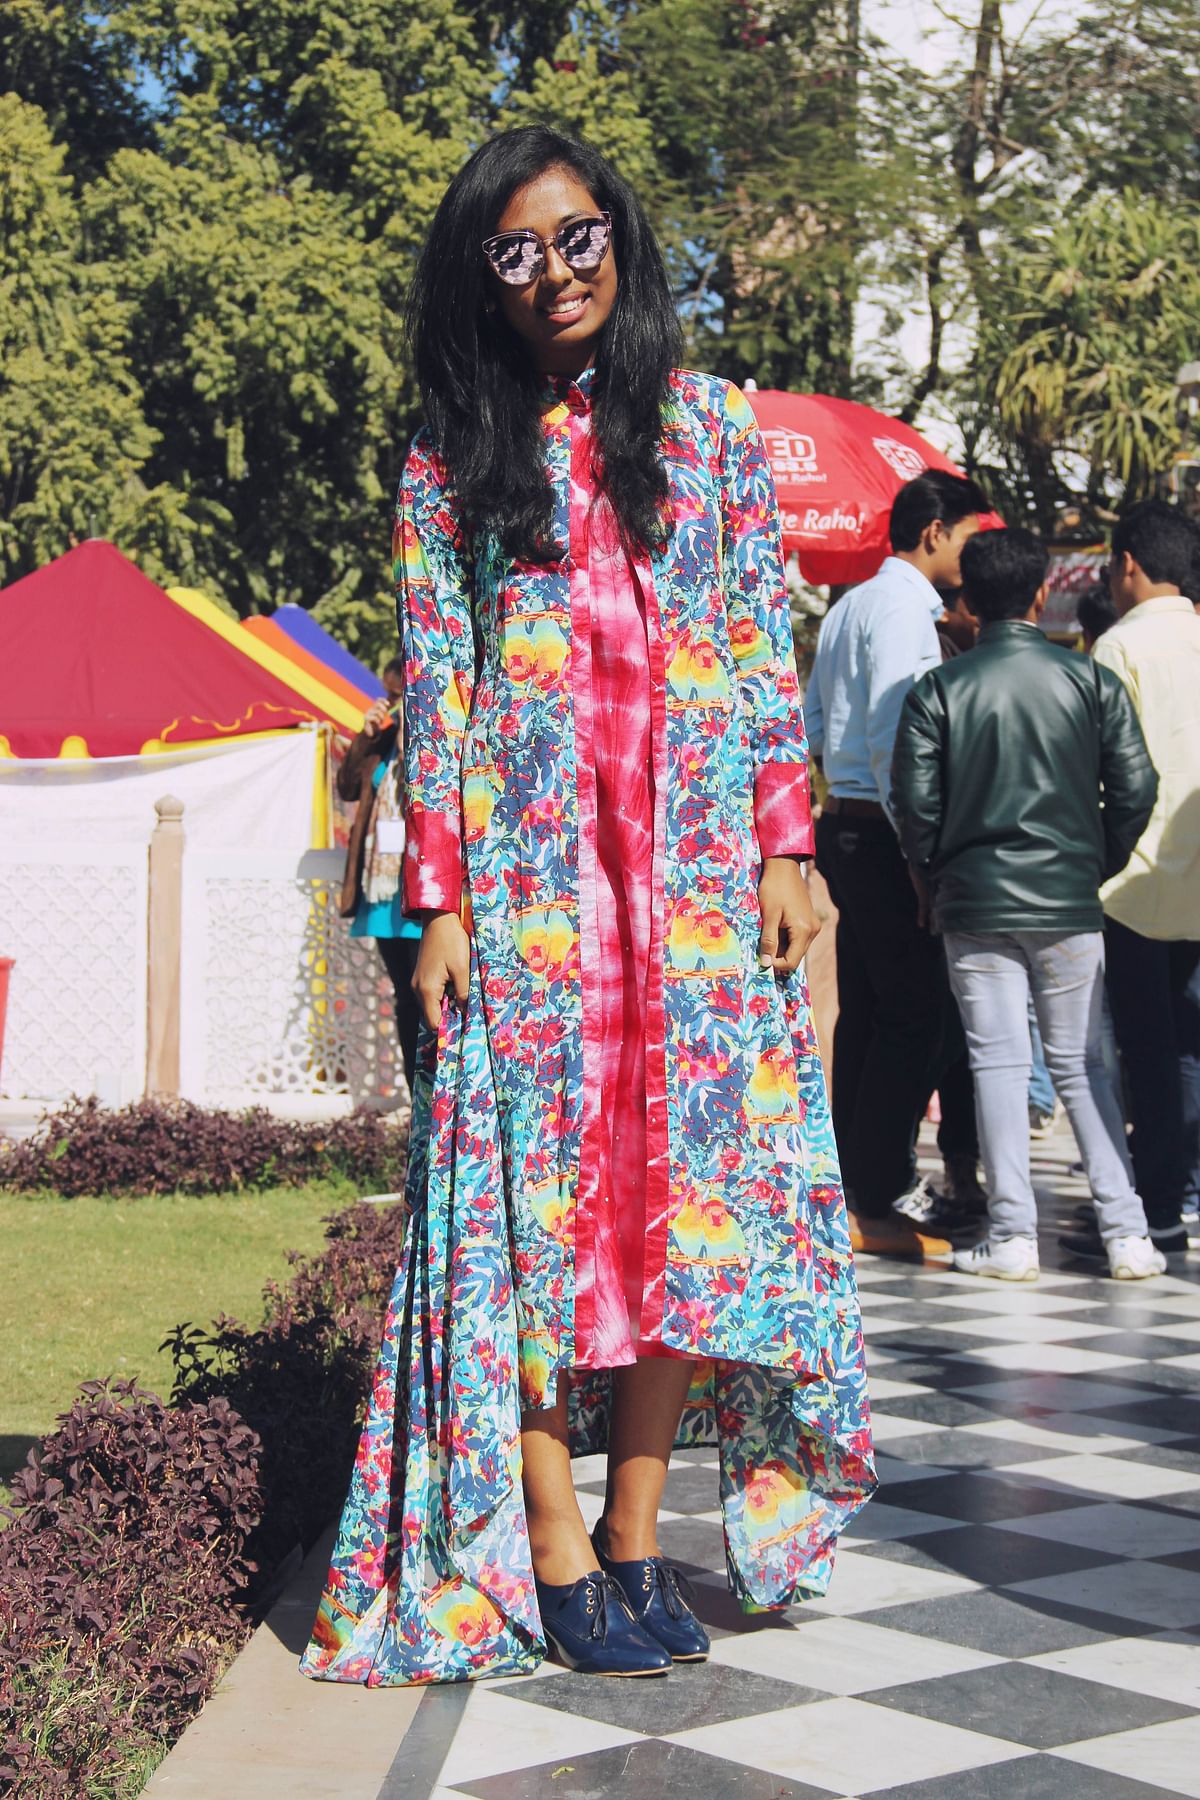 It’s an interesting mix of words and fashion at Jaipur Literature Festival 2017. Take a look.